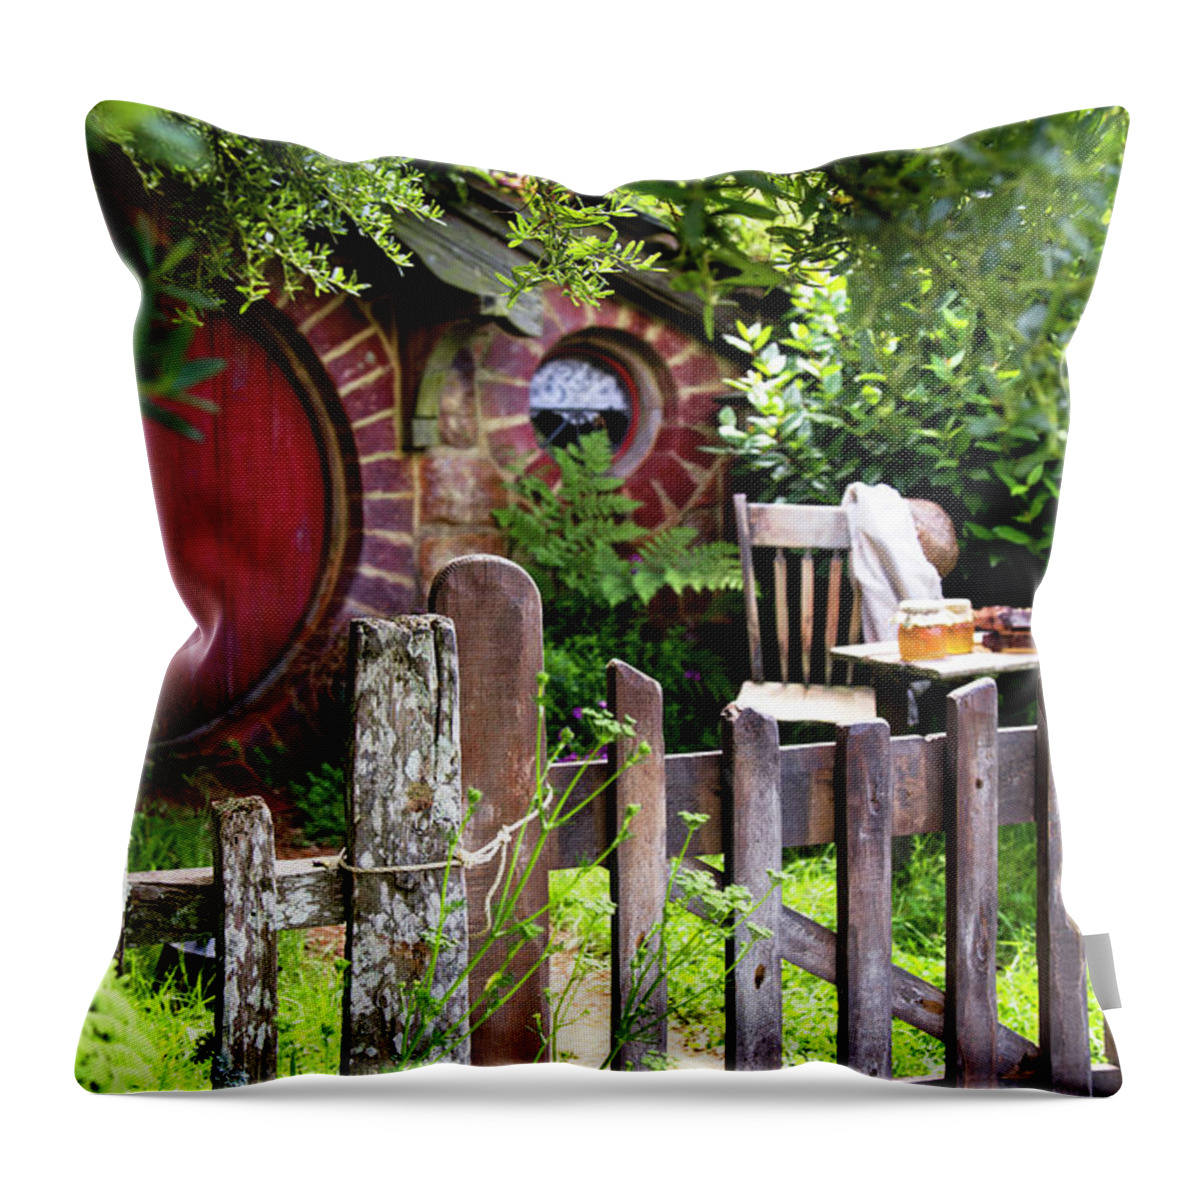 Hobbits Throw Pillow featuring the photograph Hobbit Tea and Honey by Kathryn McBride